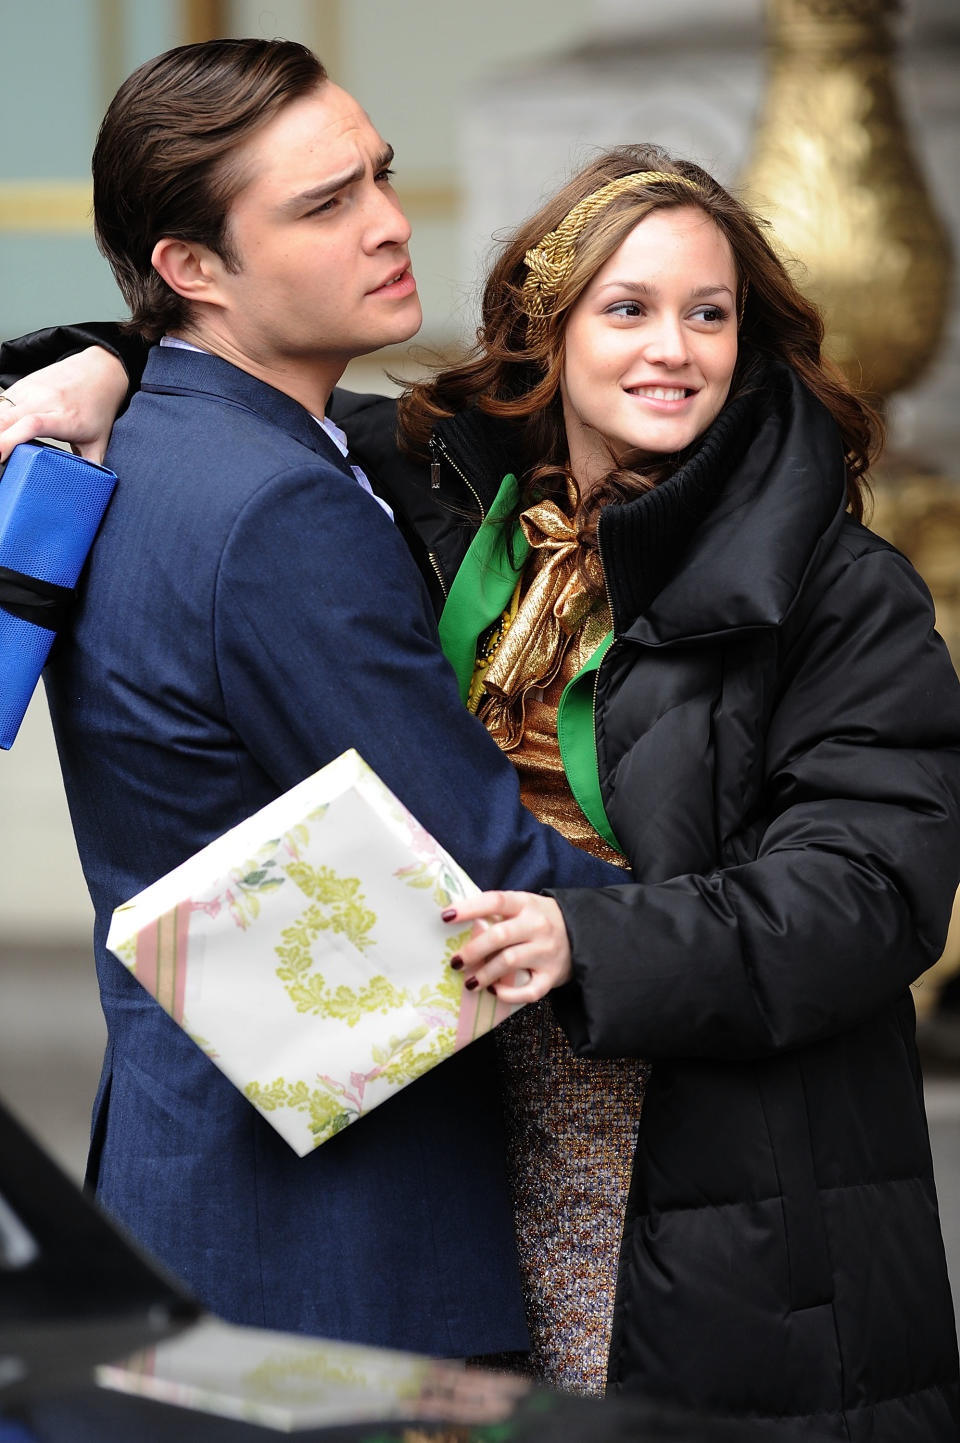 Actor Ed Westwick and actress Leighton Meester on set, in character with gift box and script